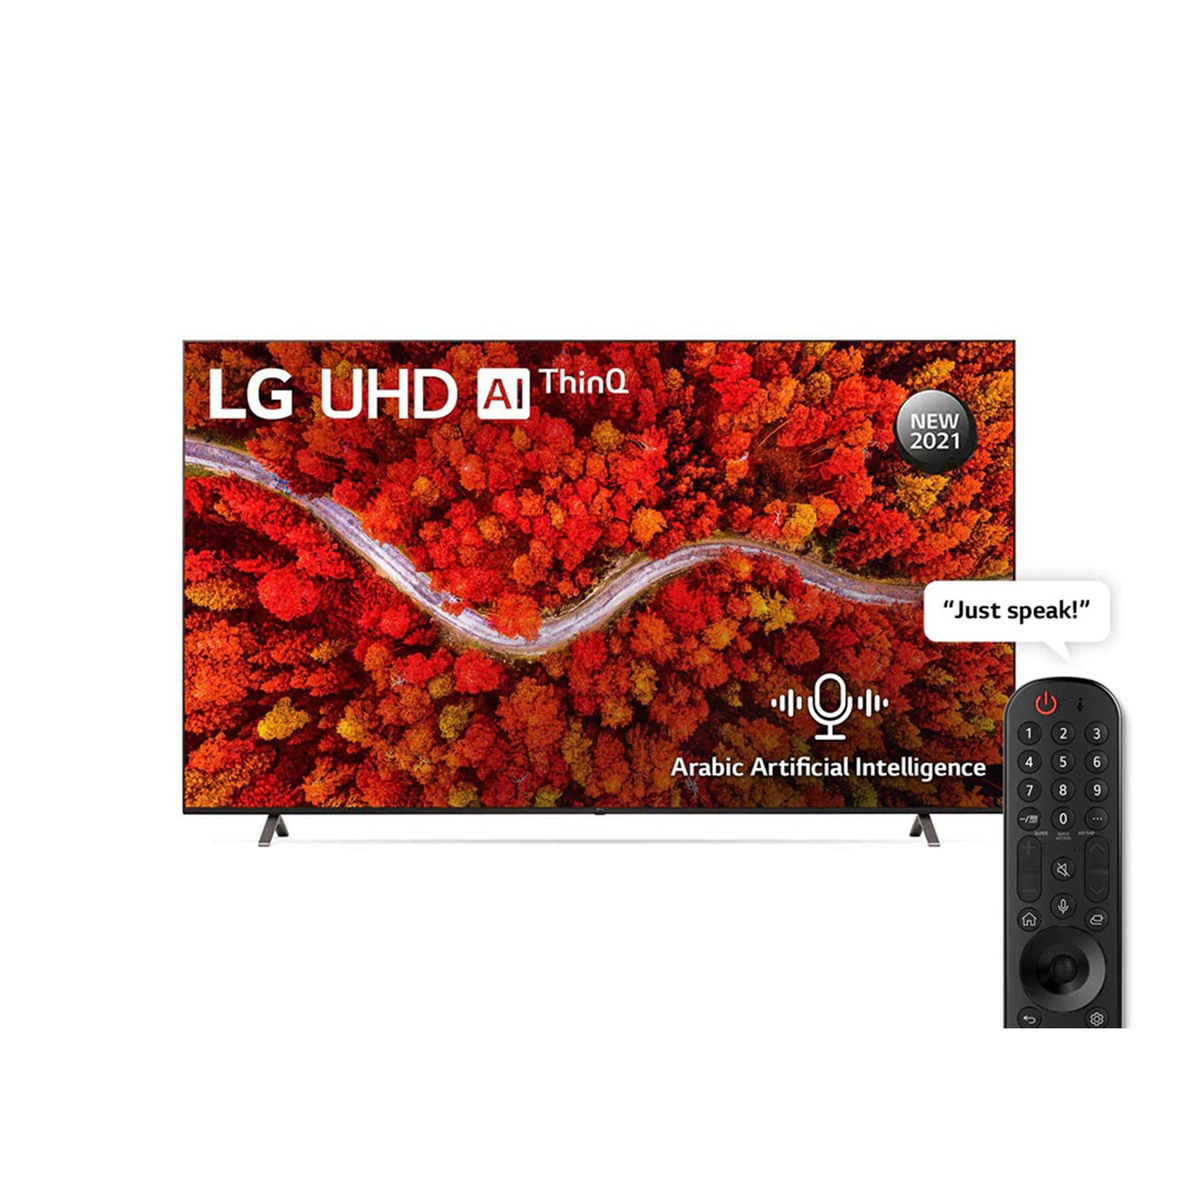 LG UHD 4K TV 86 Inch UP80 Series NEW 2021 Cinema Screen Design 4K Cinema HDR webOS Smart with ThinQ AI